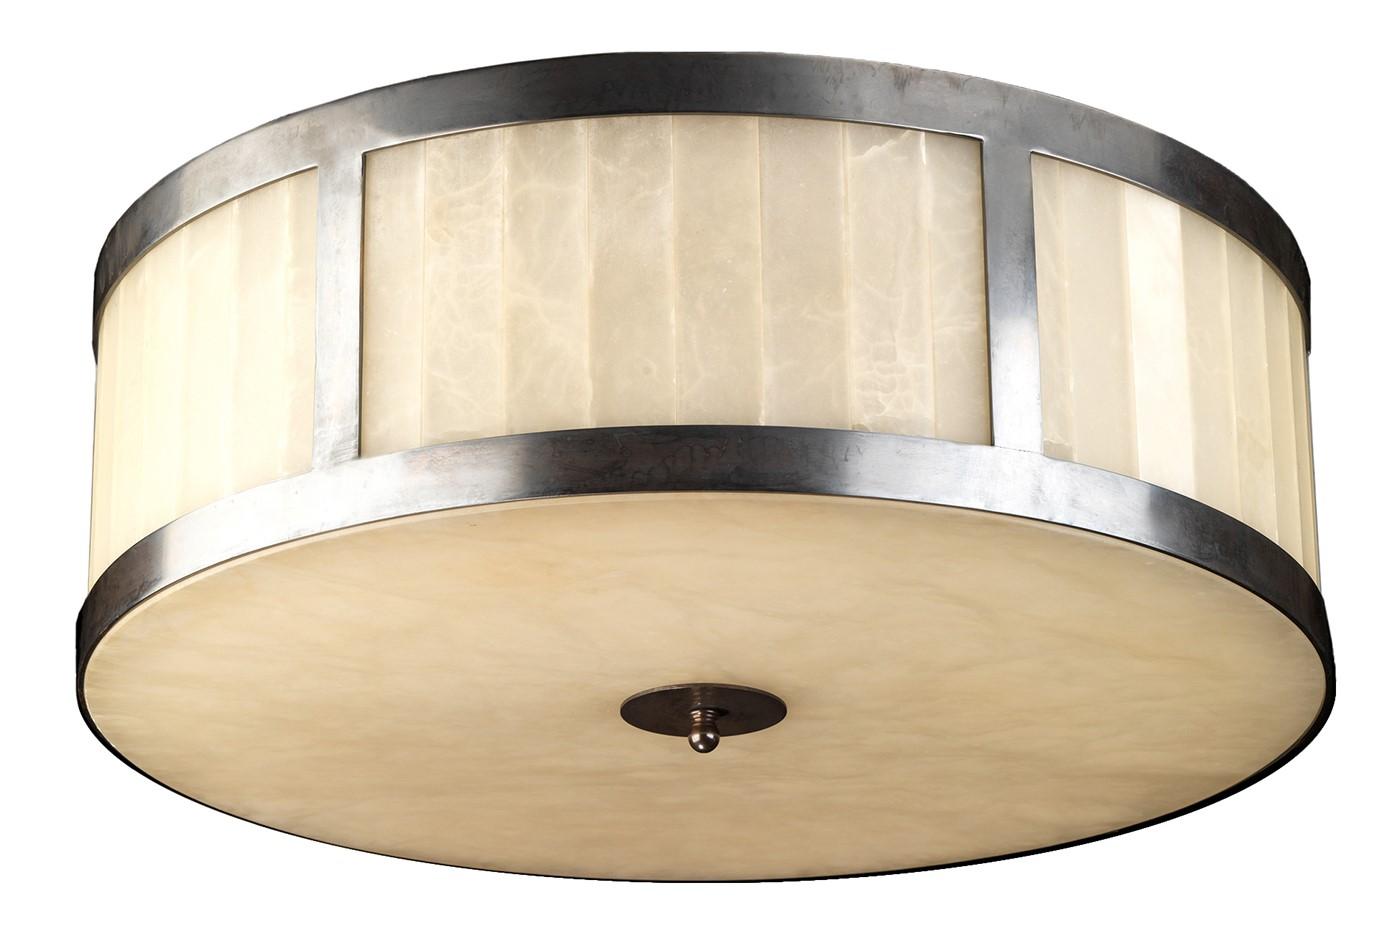 A refined addition to a modern-styled home, this exquisite flush mount light fixture boasts traditional craftsmanship. A Classic Silhouette with a retro twist, this piece features a Classic drum shape crafted in alabaster and framed with vertical